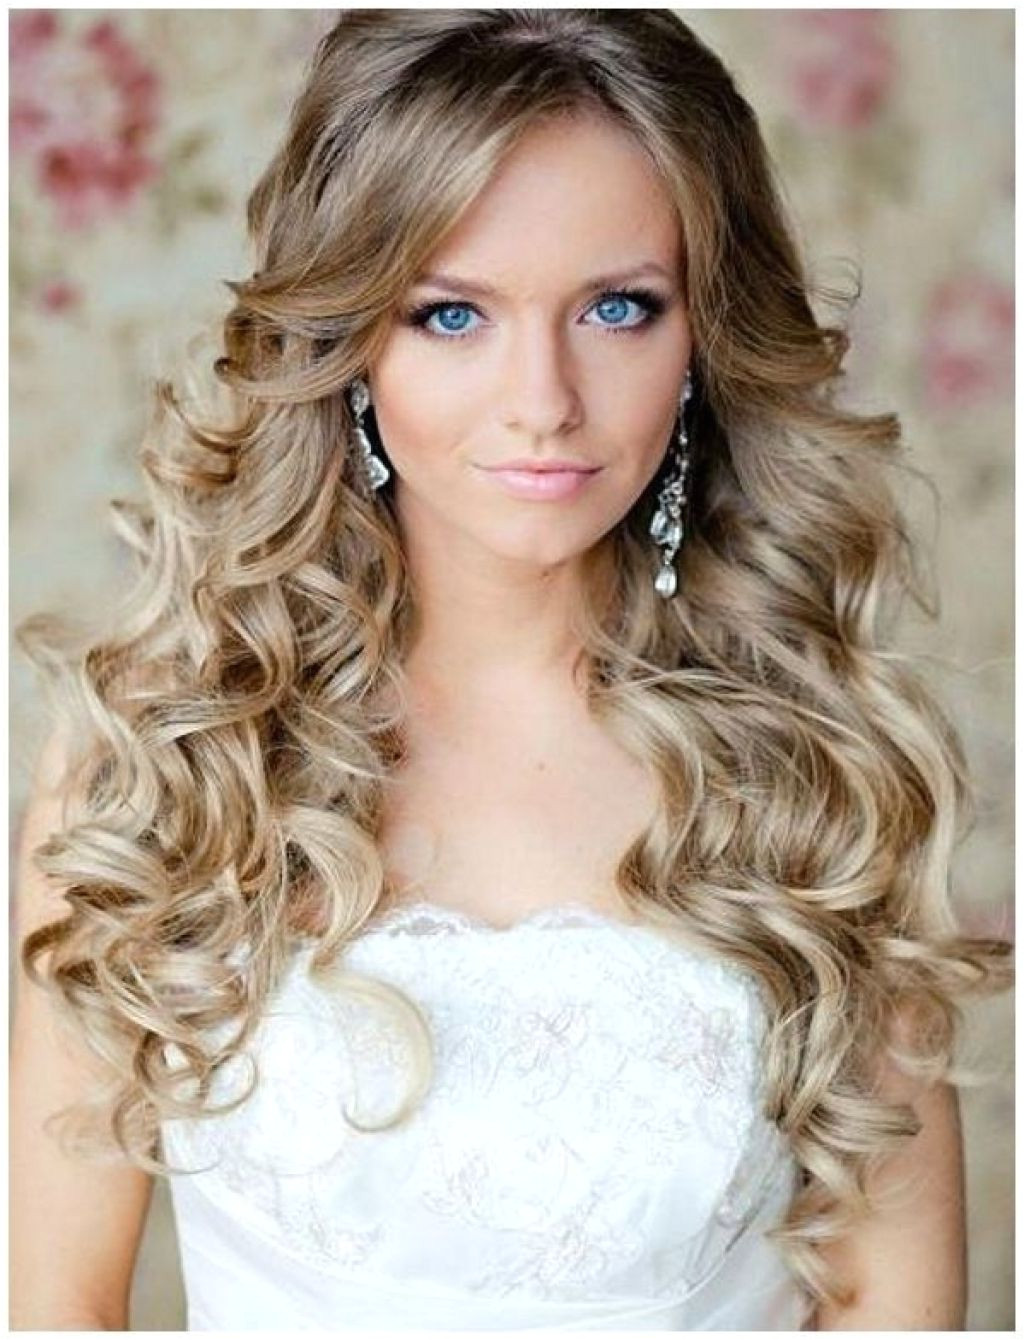 Attending A Wedding Hairstyles Wedding Guest Hairstyles with Bangs Simple Wedding Hairstyles Simple